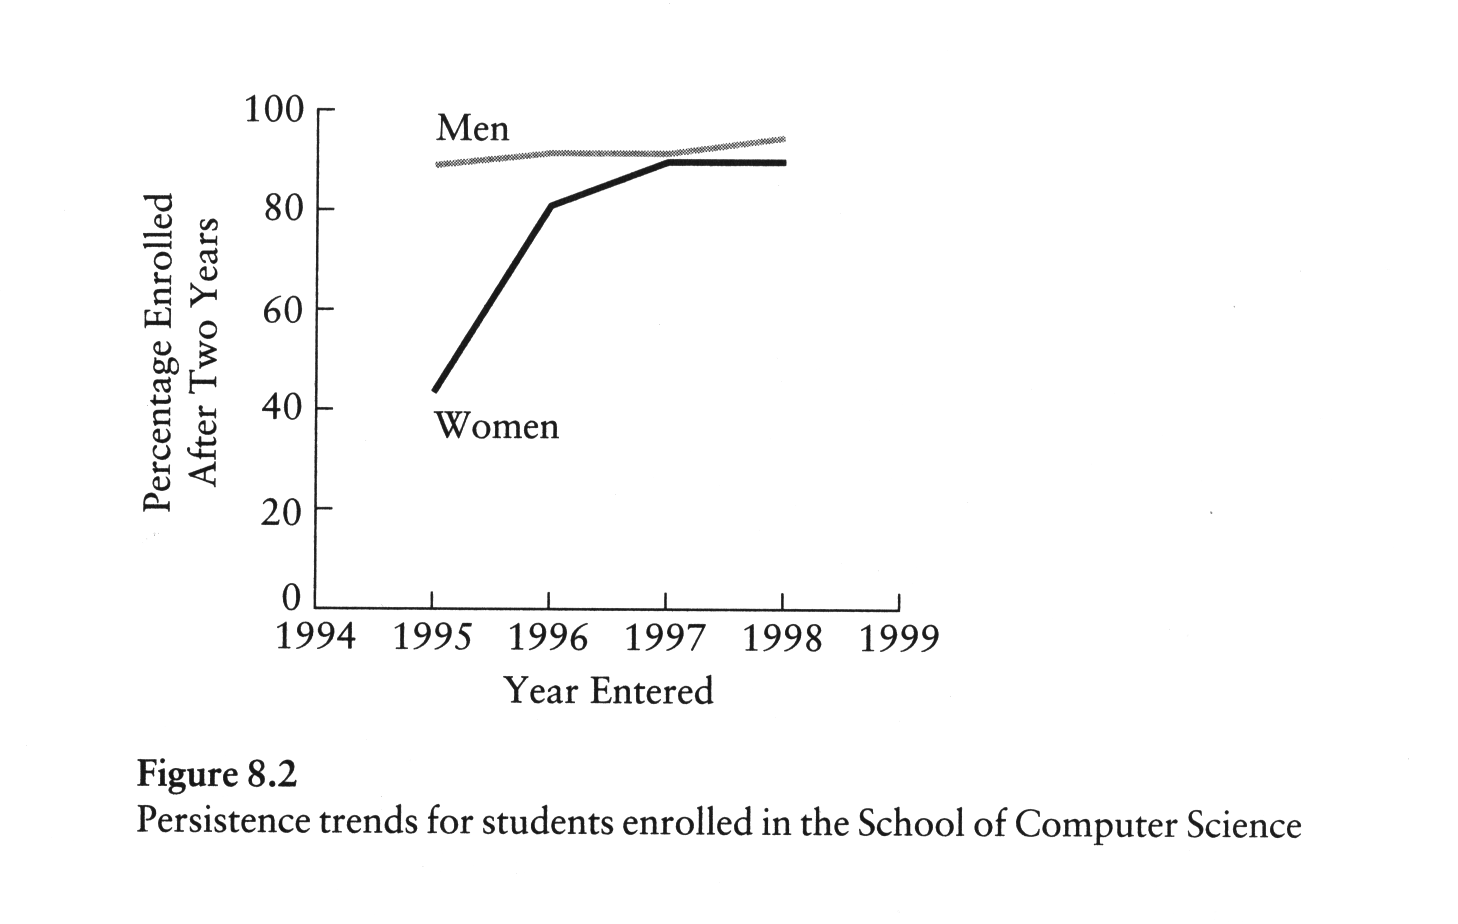 Graph of persistence rate for women and men in undergraduate computer science at CMU, 1995-1998